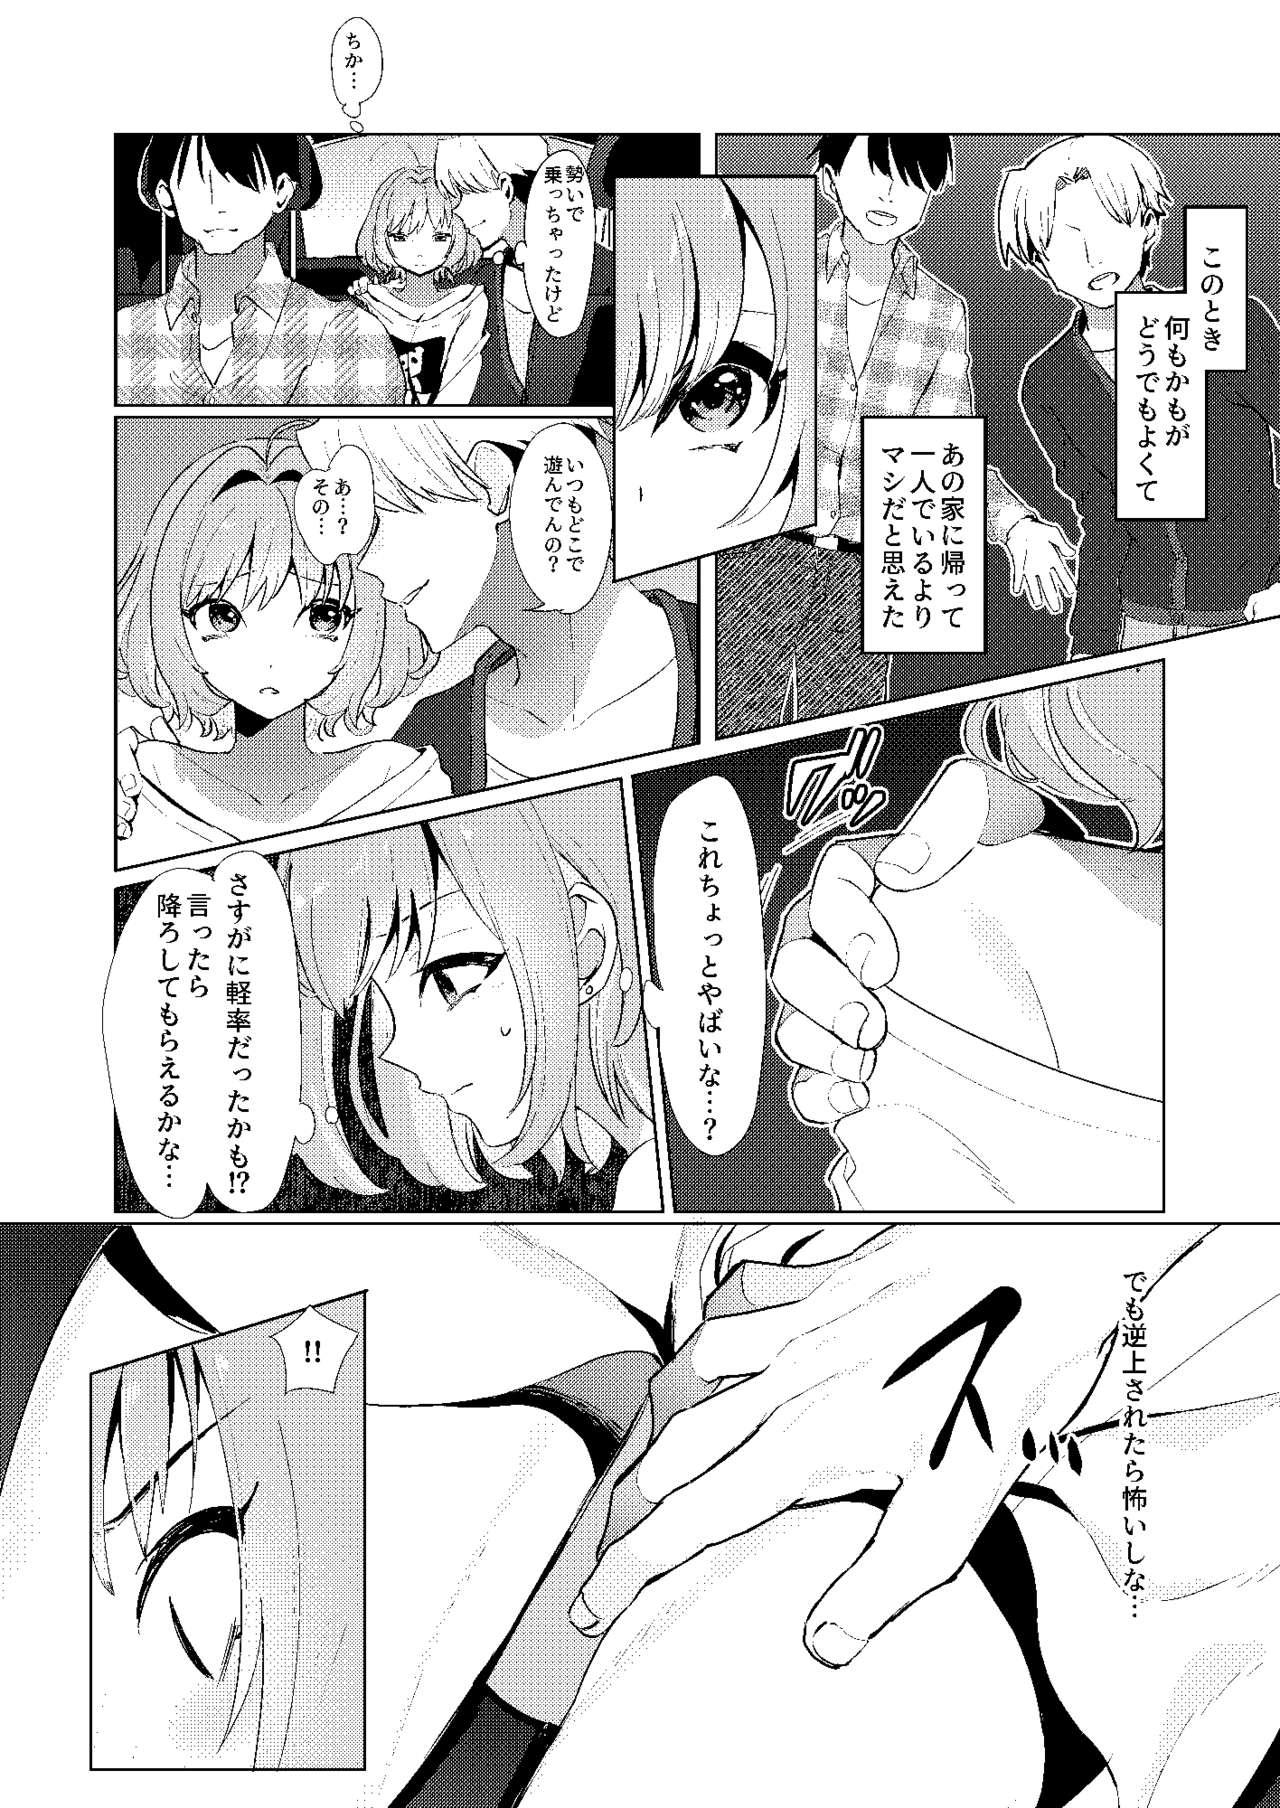 Outdoor Sex 夢〇りあむの青春 - The idolmaster Spoon - Page 11